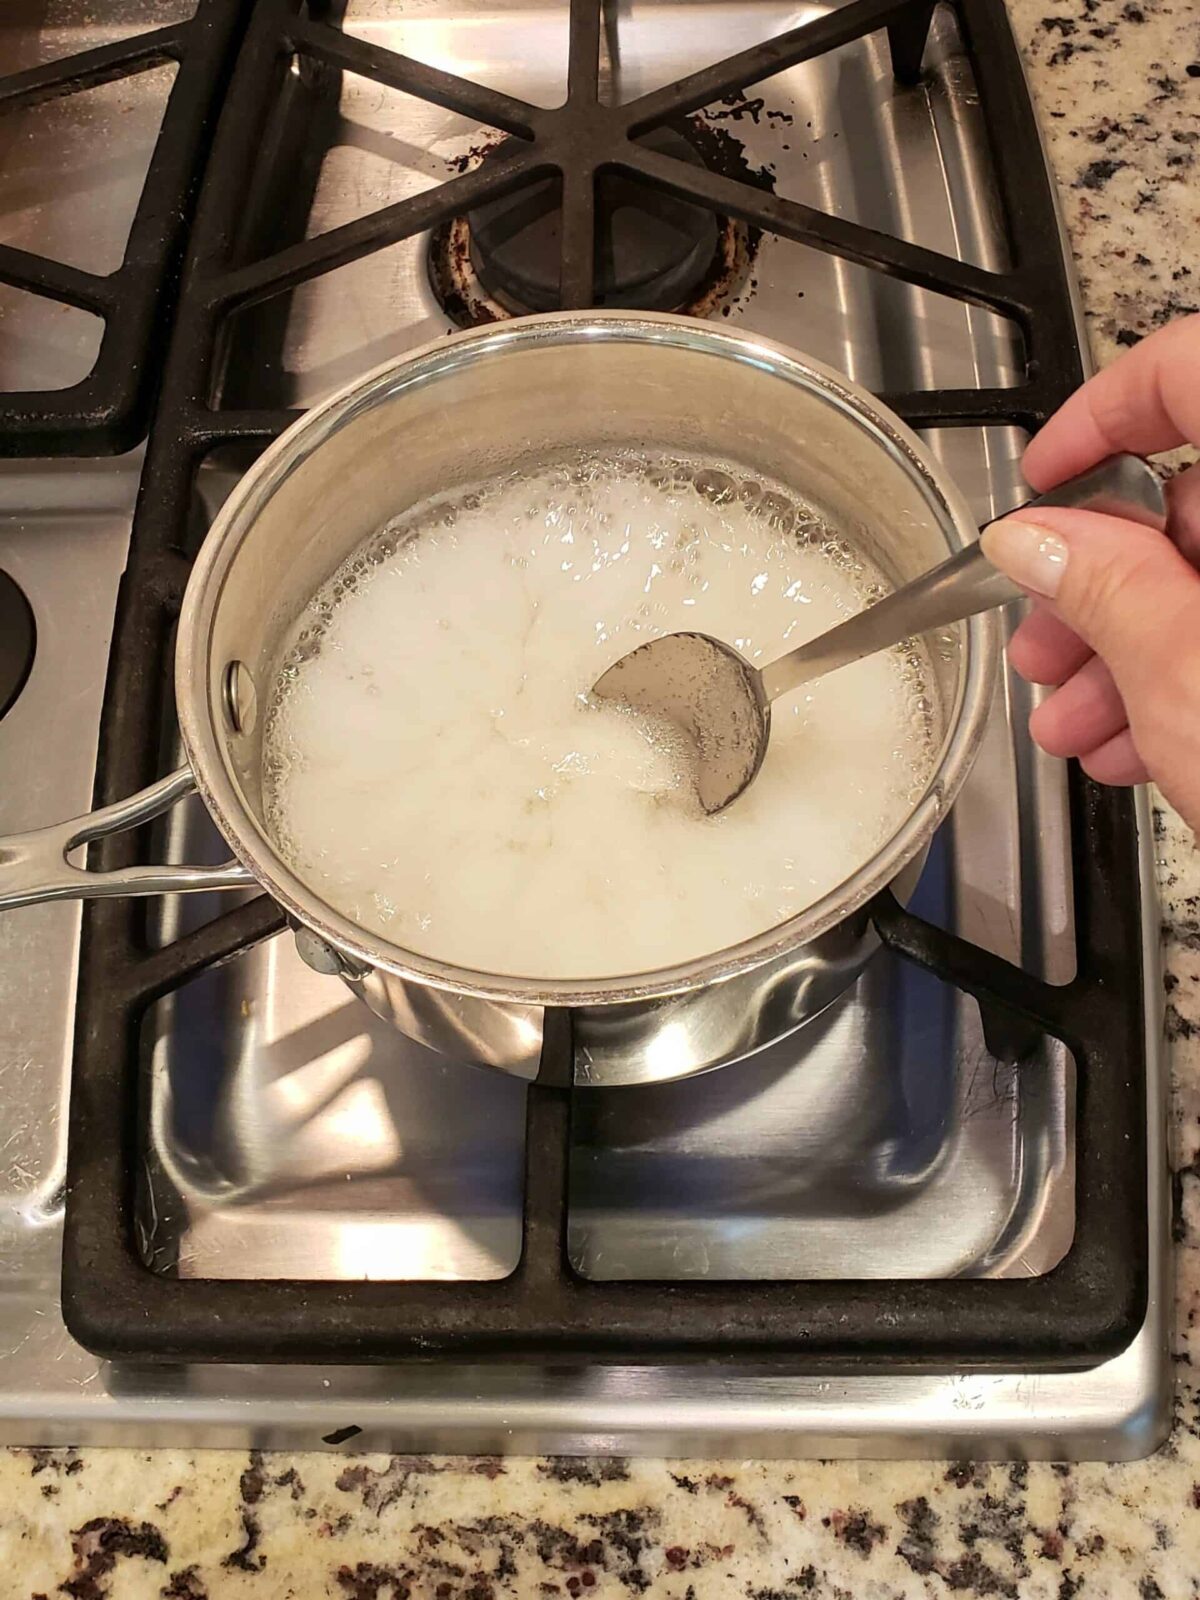 Combine pectin and water in a small saucepan and bring to a boil over a gas burner.